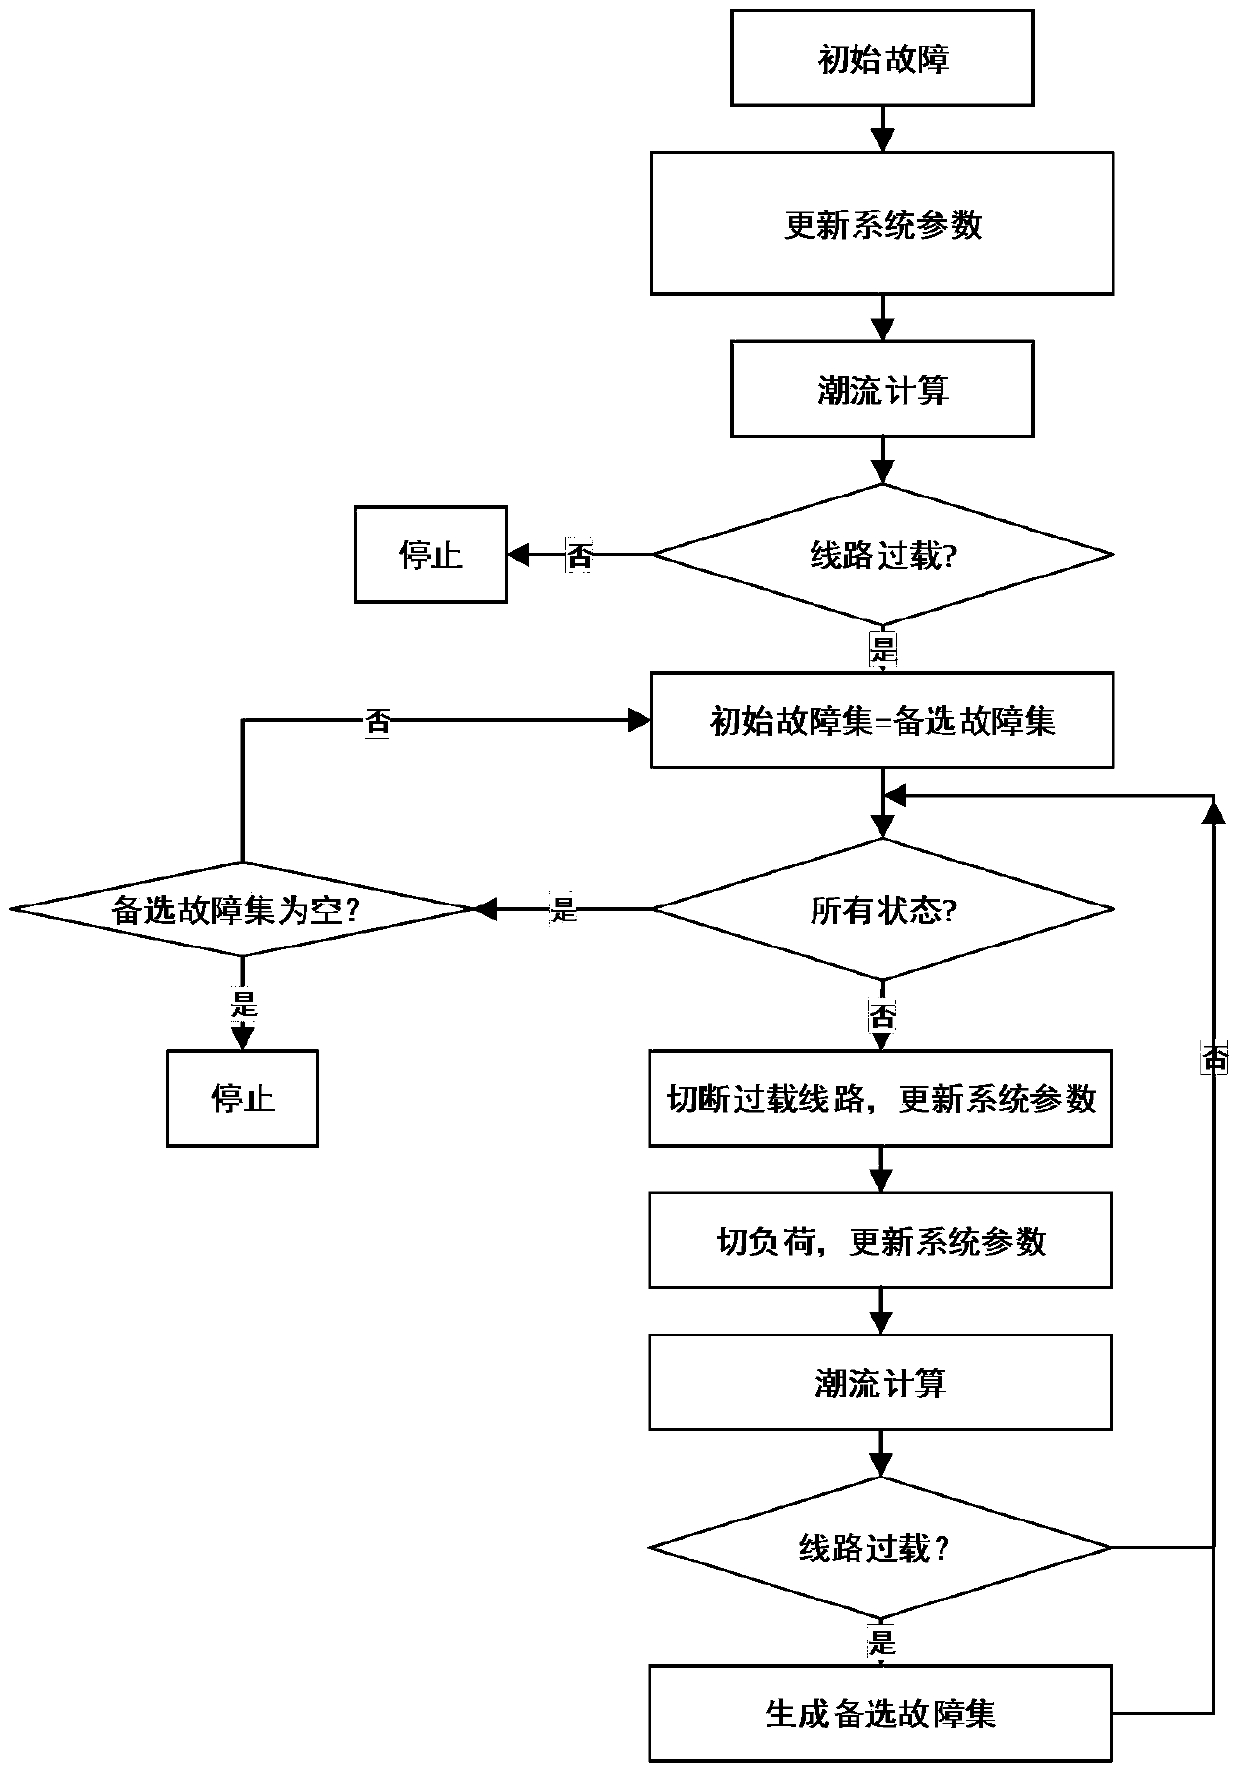 Cascading fault search and weak link analysis method based on operational reliability model